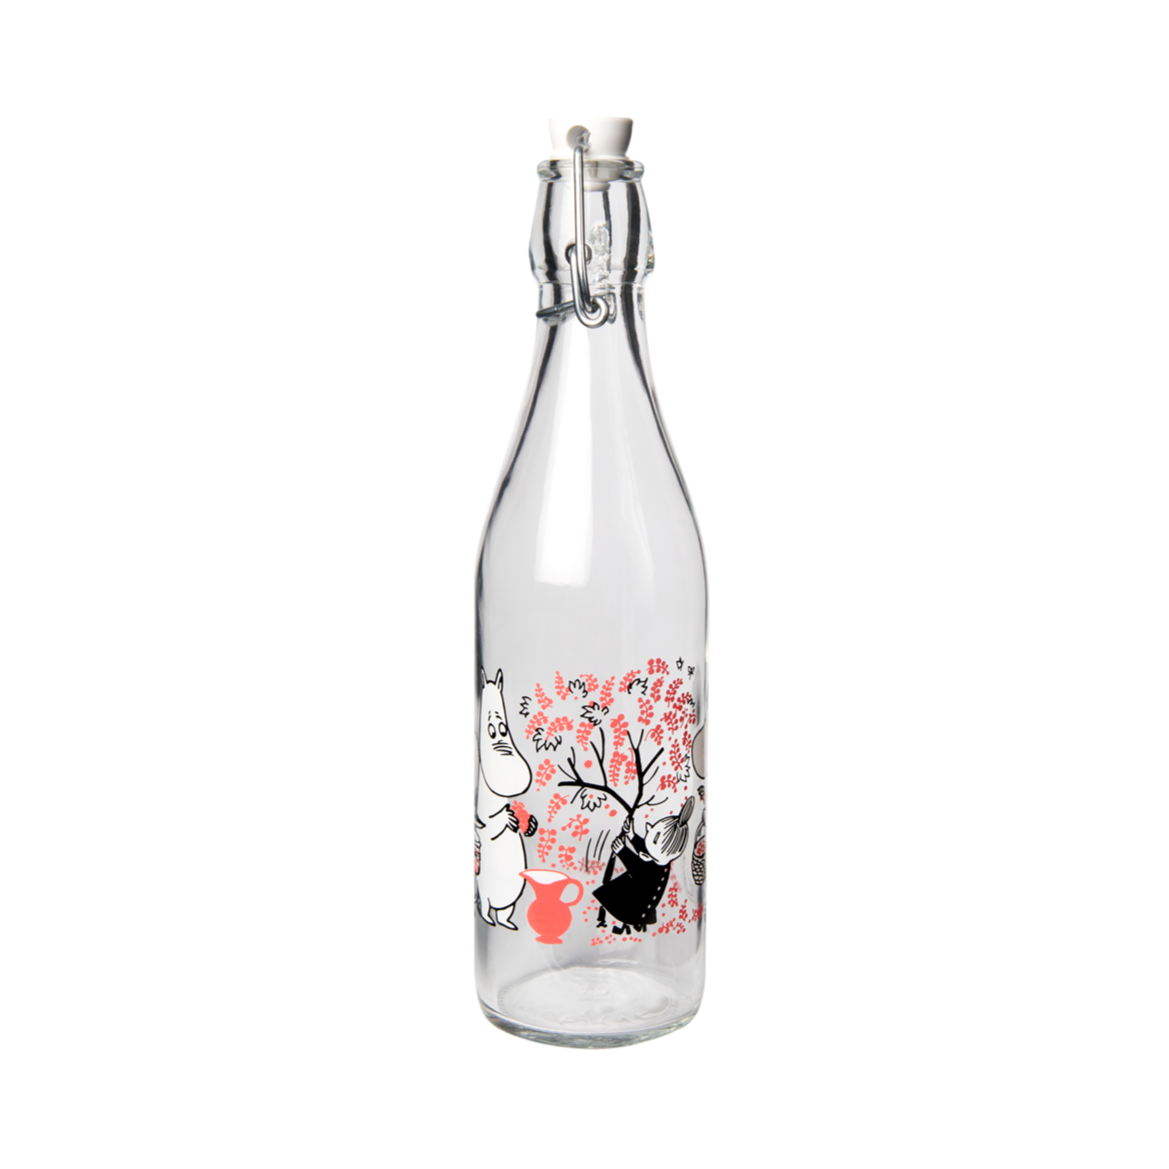 Muurla Moomin Berries Glass Bottle with Clamp Stopper, 0.5L. 774-050-02